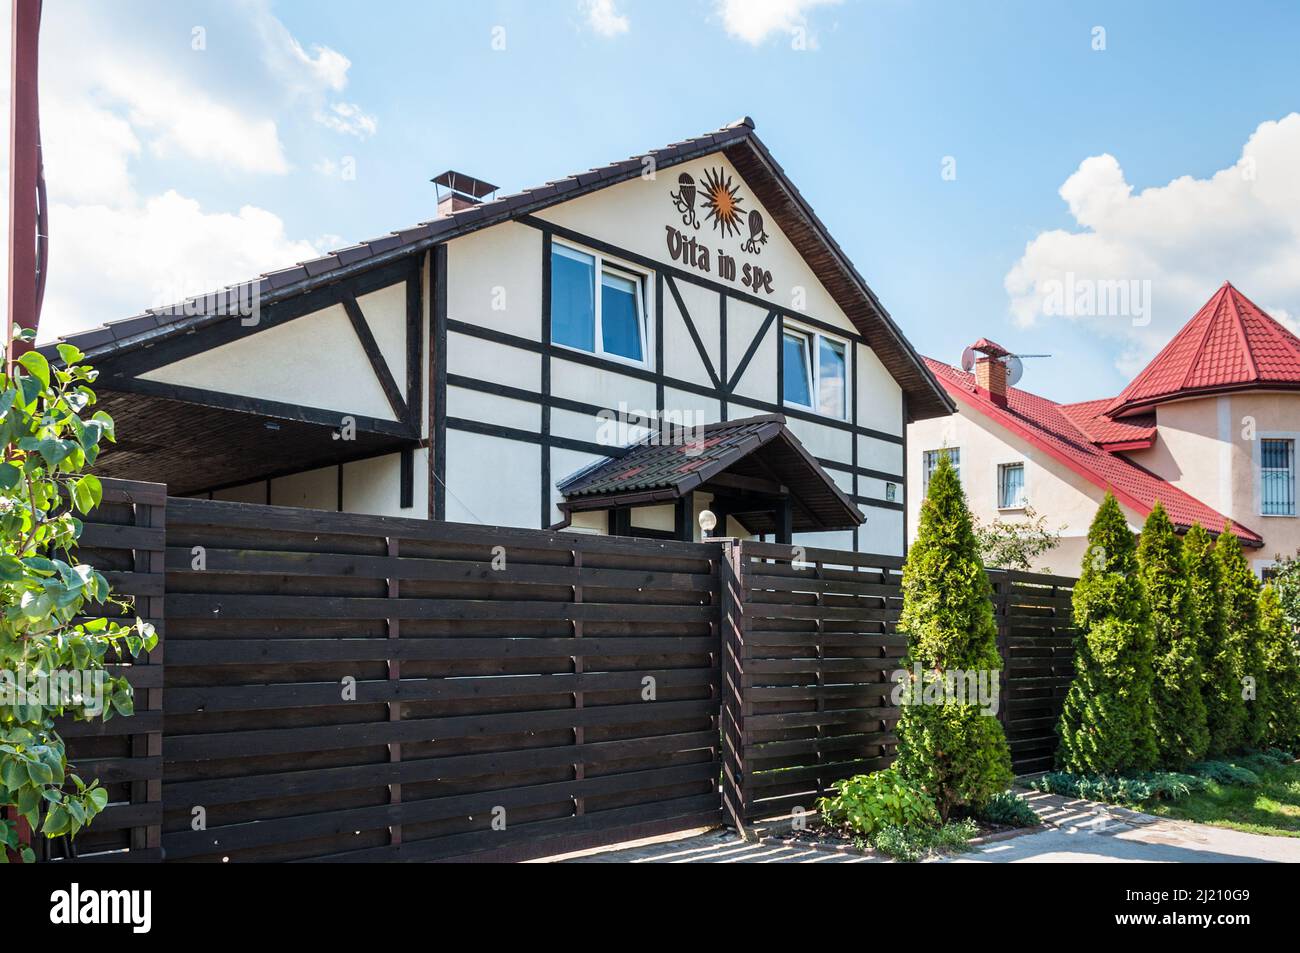 Kyiv, Ukraine - July 3, 2021: Luxury half-timbered house in the Osokorky area on the left bank of Kyiv, the capital of Ukraine. Fachwerk style. The in Stock Photo